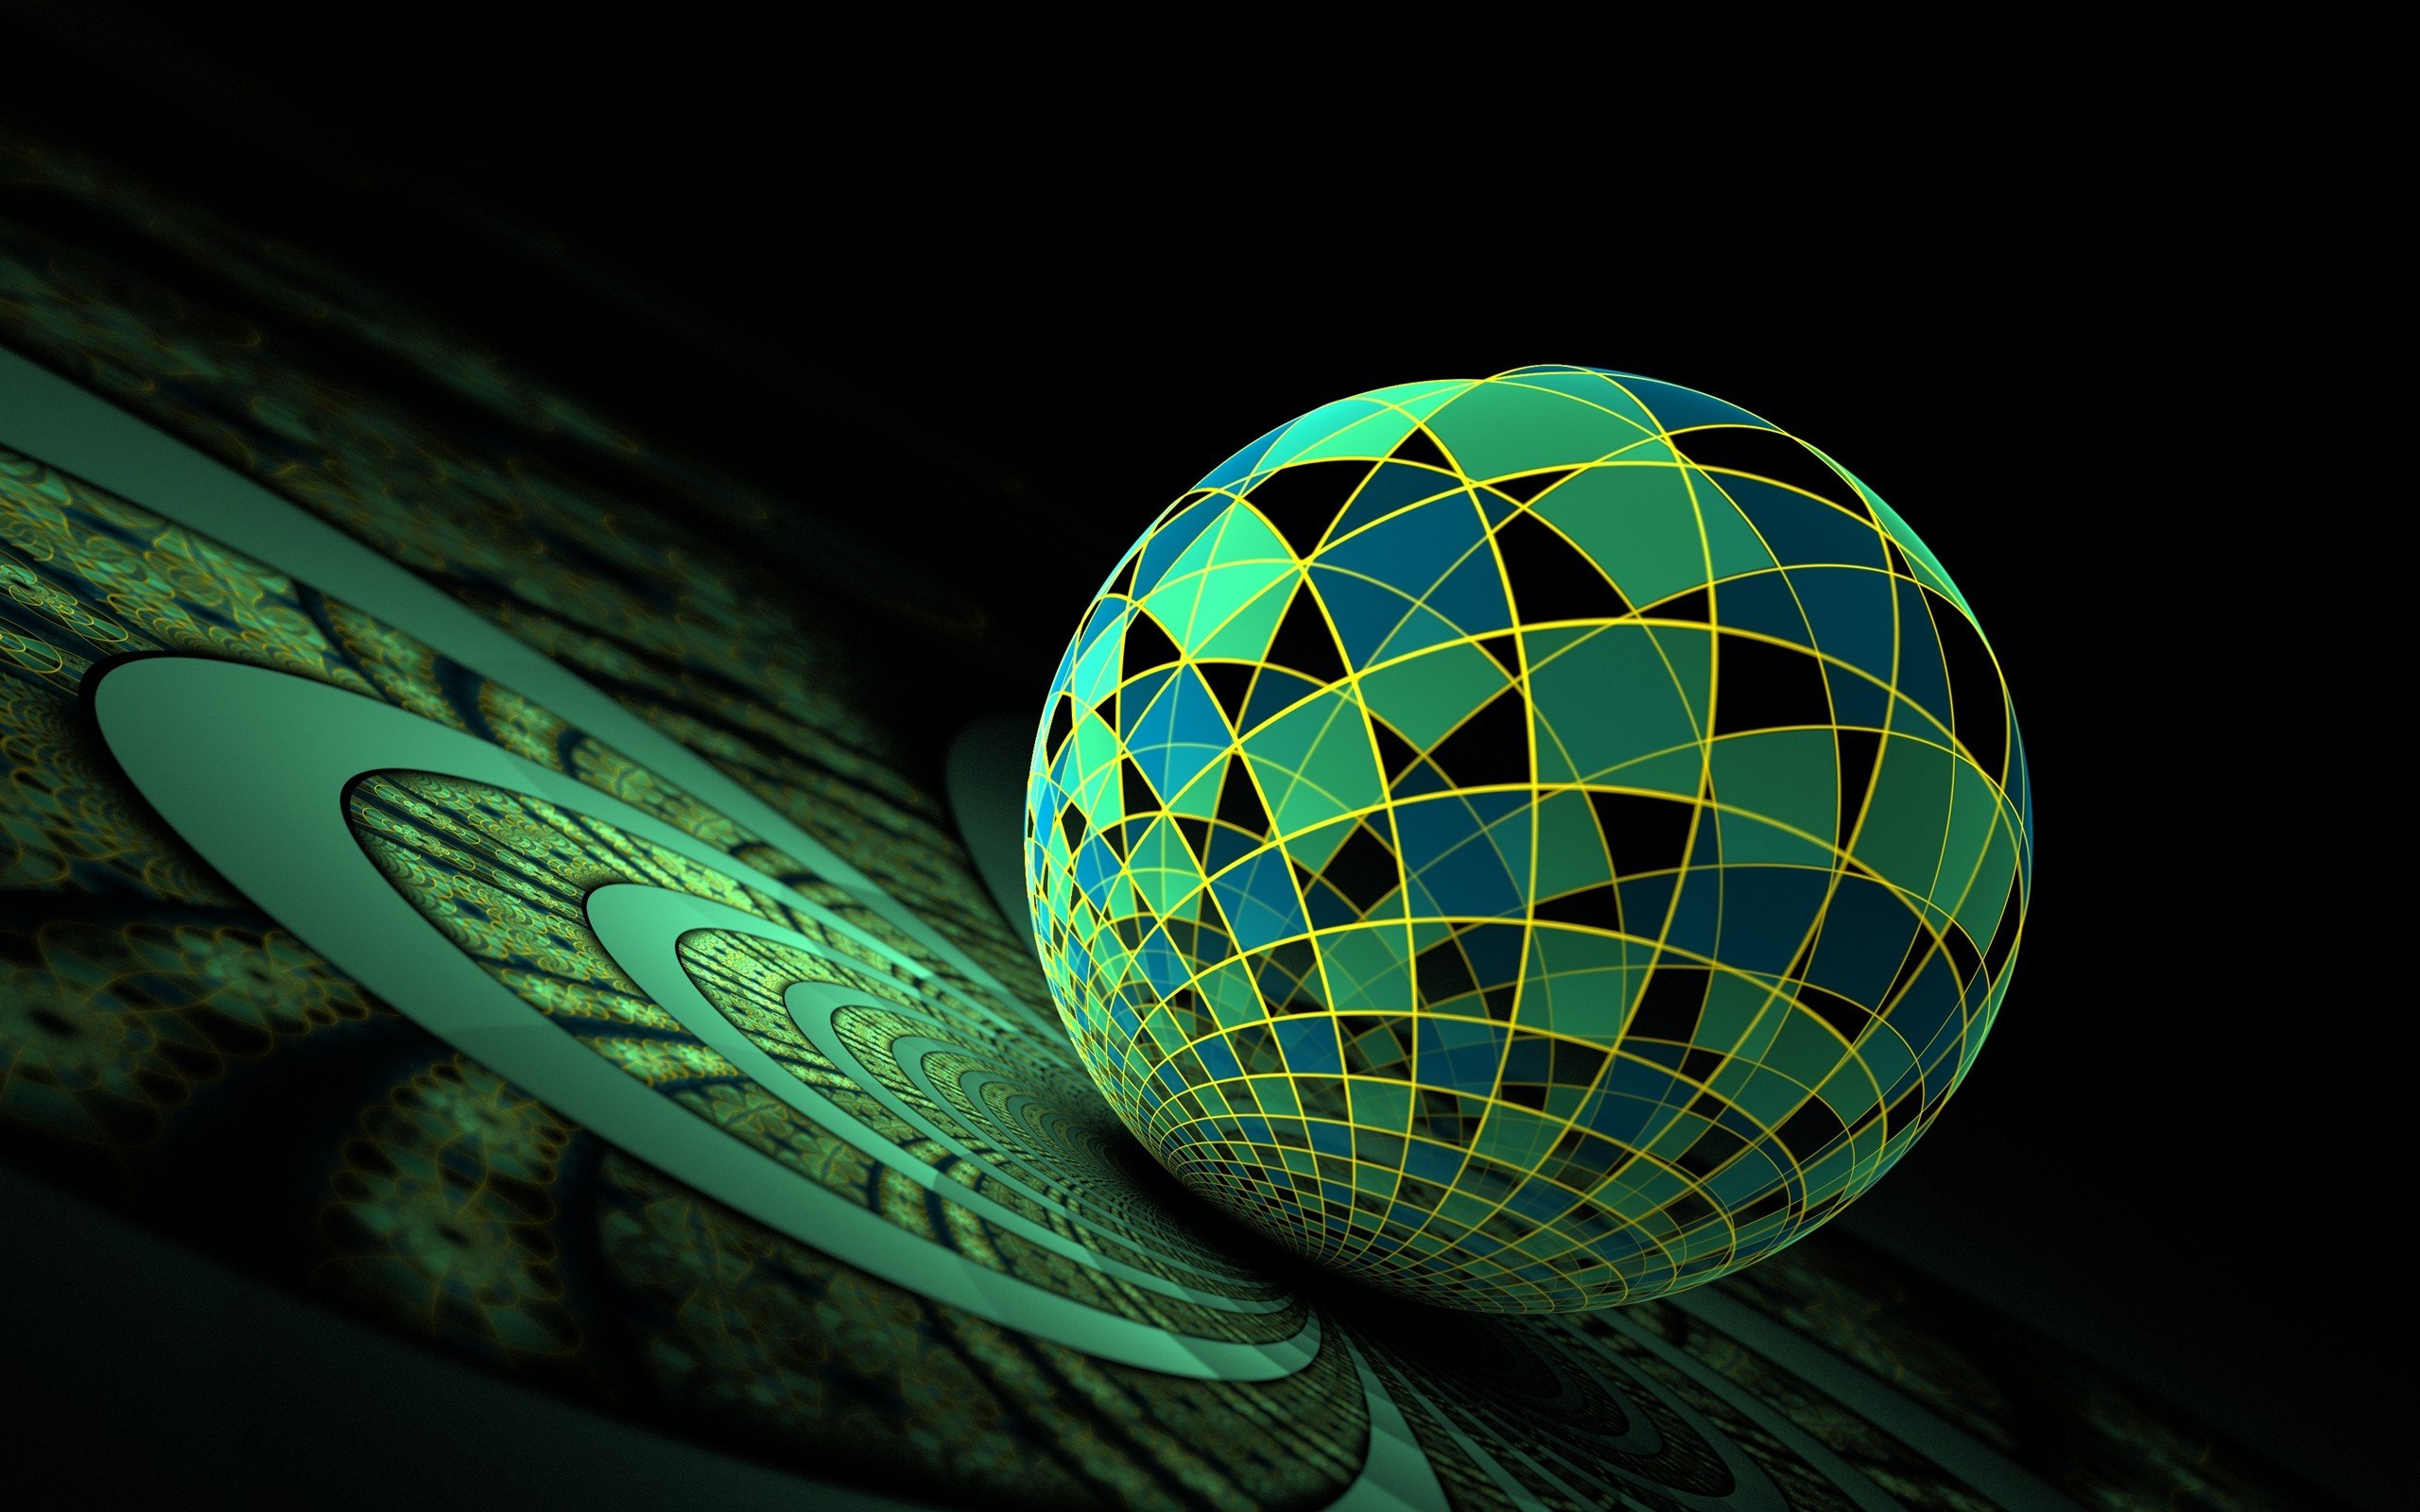 [49+] Amazing 3D HD Abstract Wallpapers on WallpaperSafari